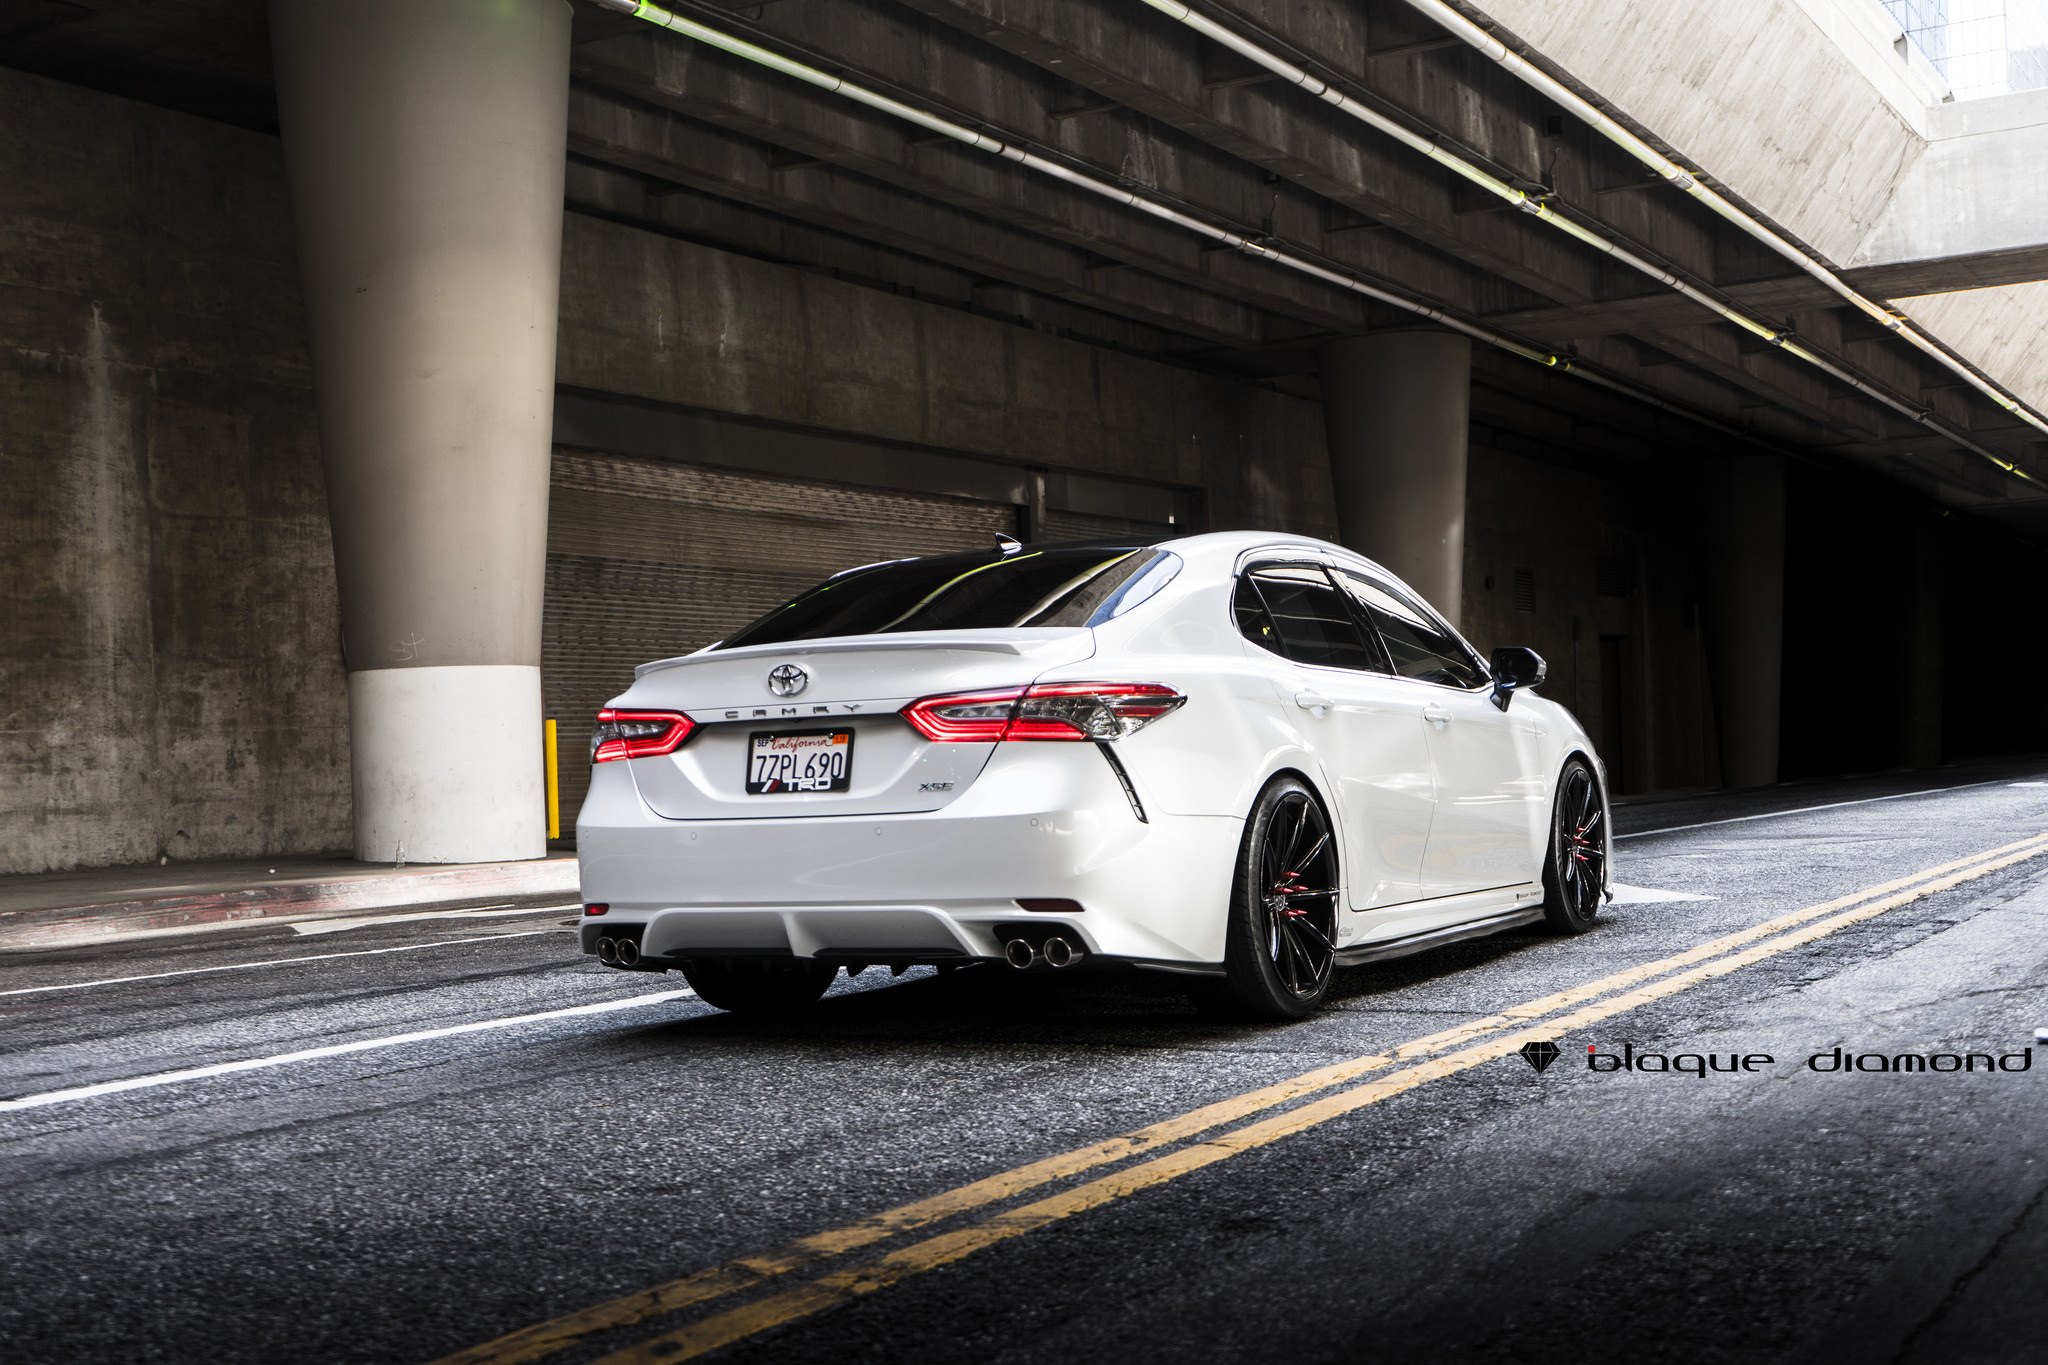 Aftermarket Rear Diffuser on White Toyota Camry - Photo by Blaque Diamond Wheels